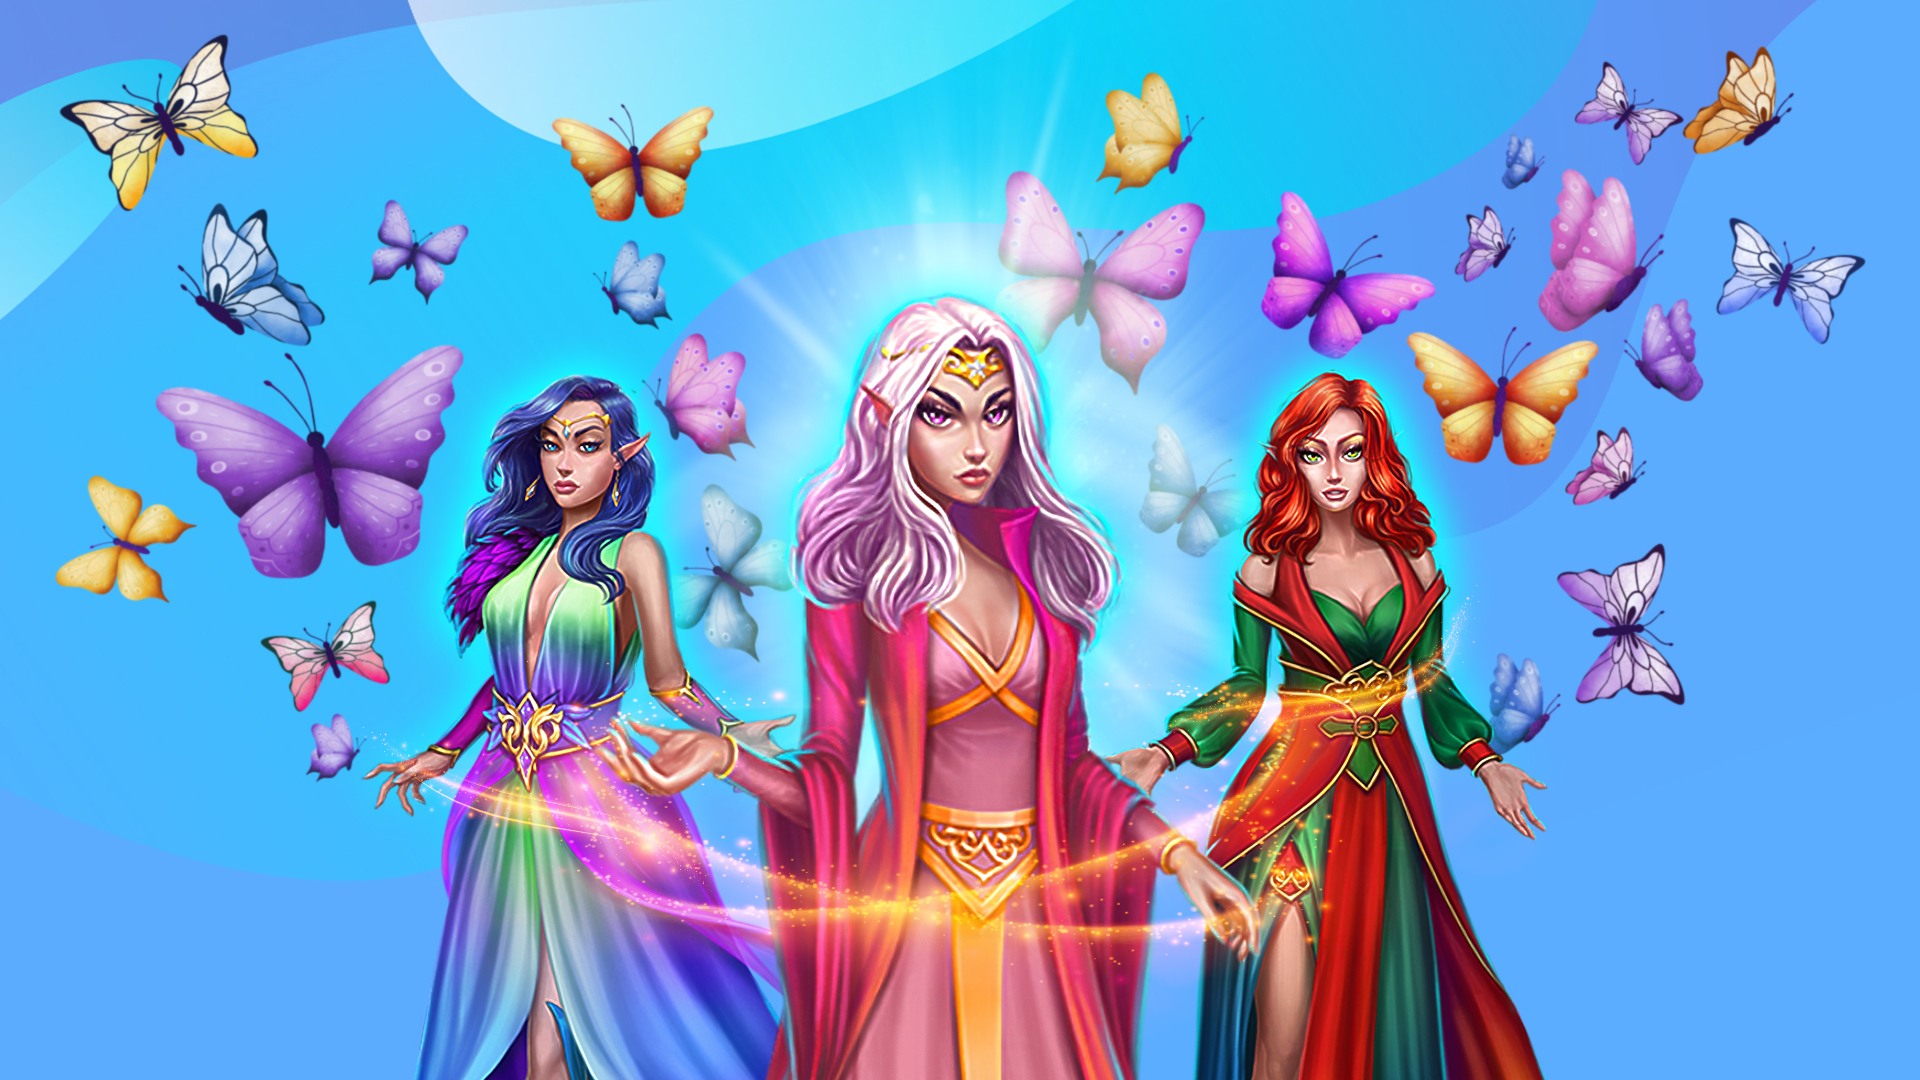 Three 3D-animated fairies from the SlotsLV slots game, Fairy Wins, are dancing in flowing bright dresses. Circling around them are wisps of magic and butterflies as they hold their hands outstretched.